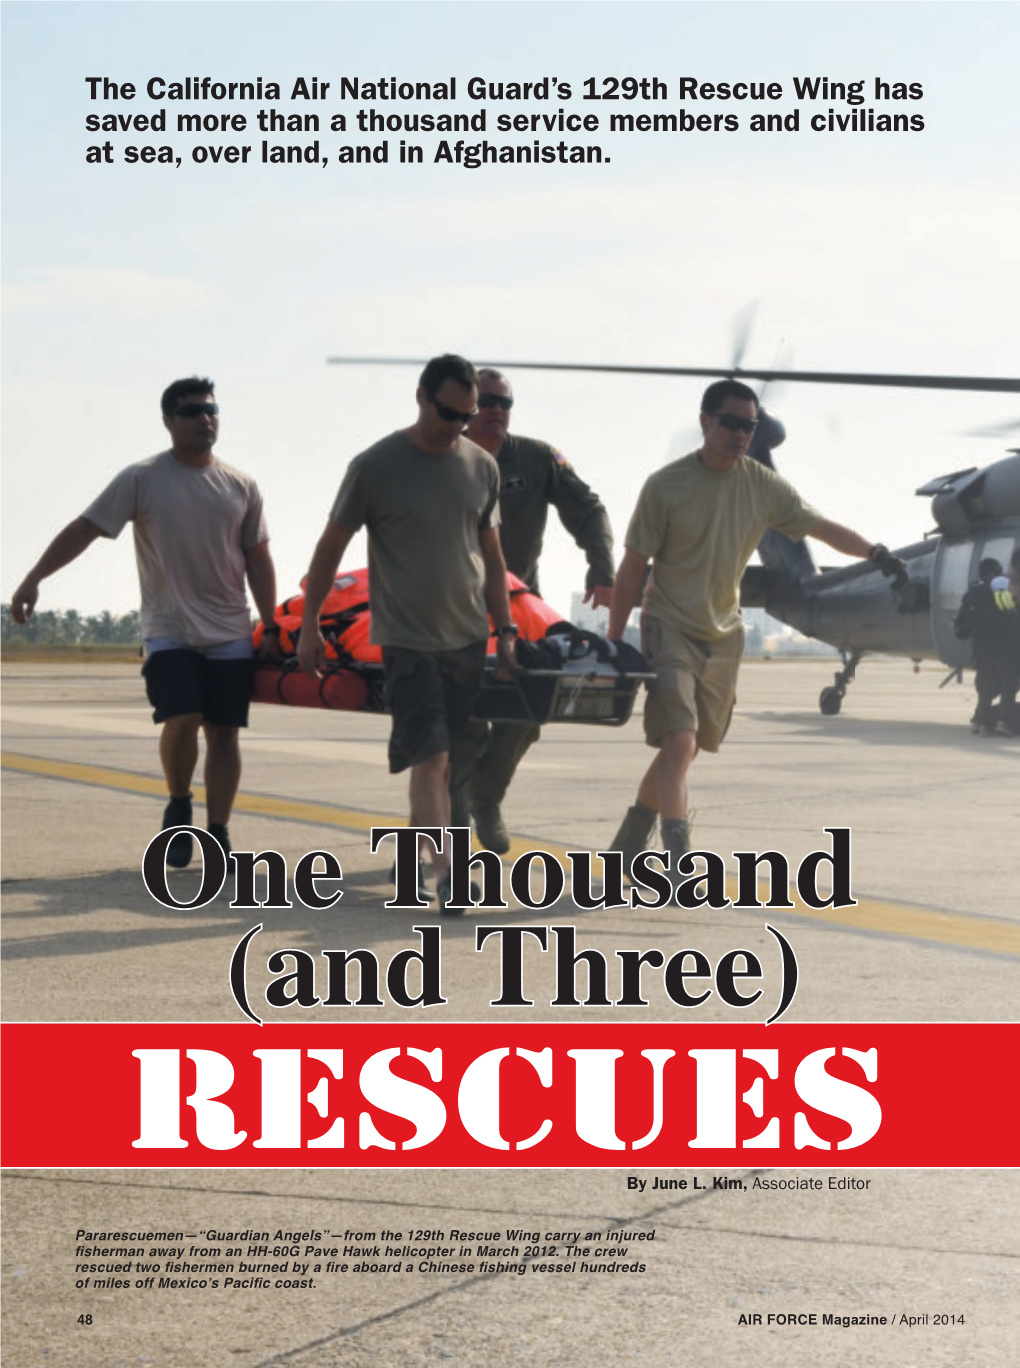 One Thousand (And Three) Rescues by June L